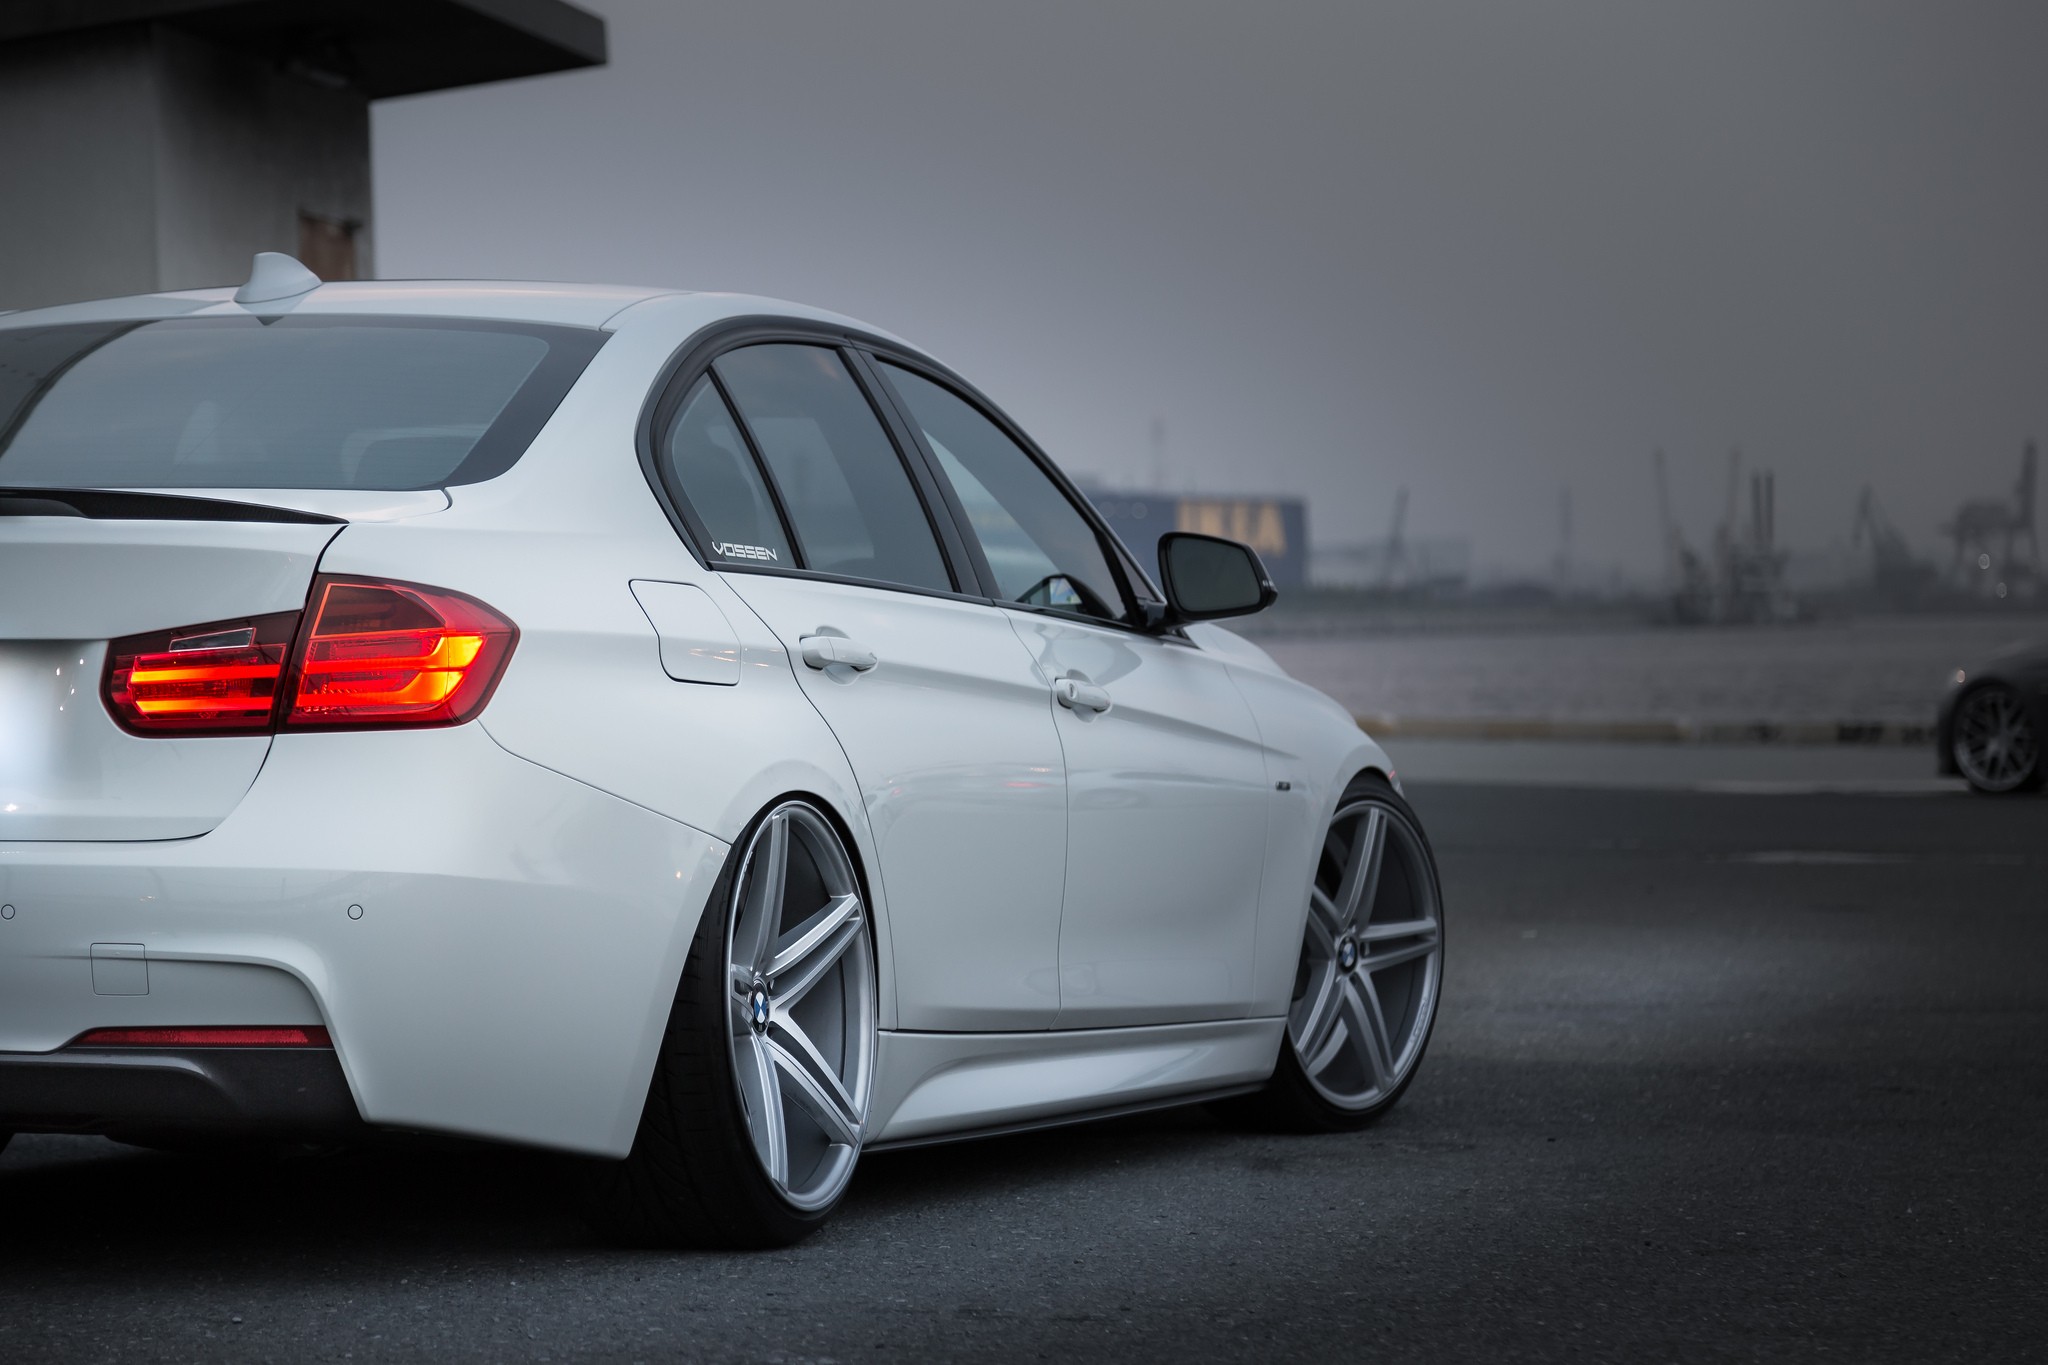 Free photo White BMW M3 on nice big rims photographed from behind